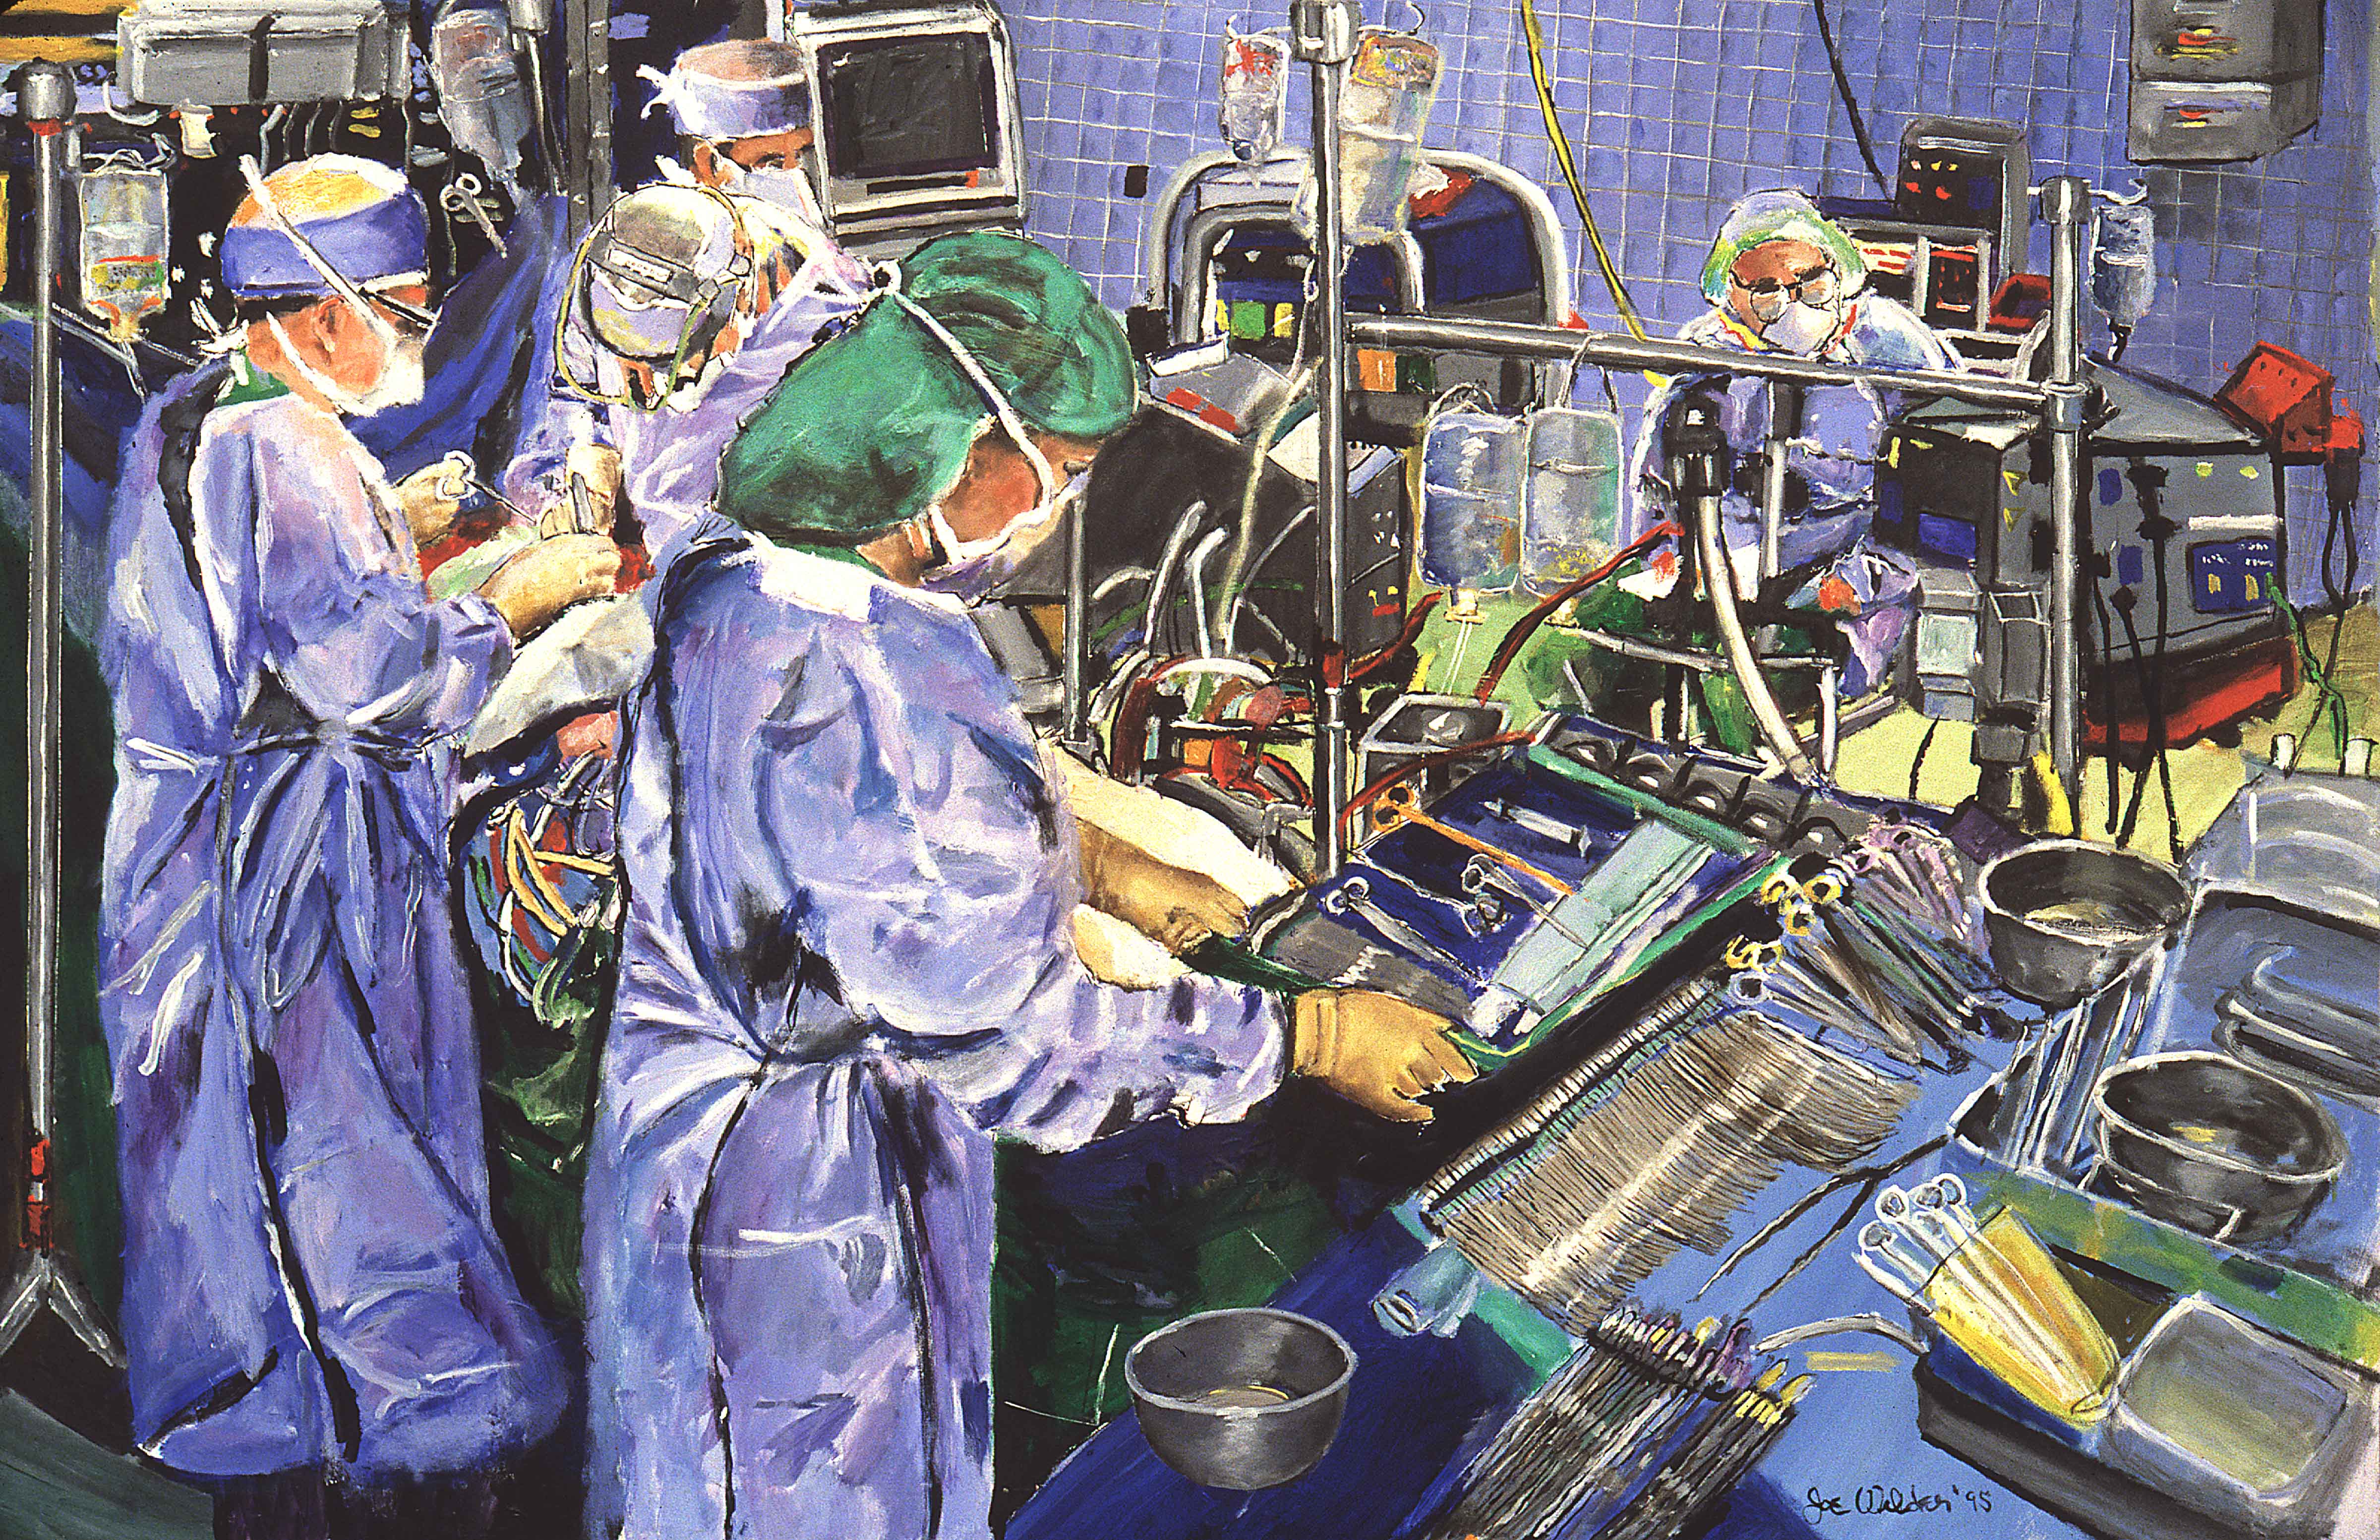 Cardiac Surgery - click to view in detail